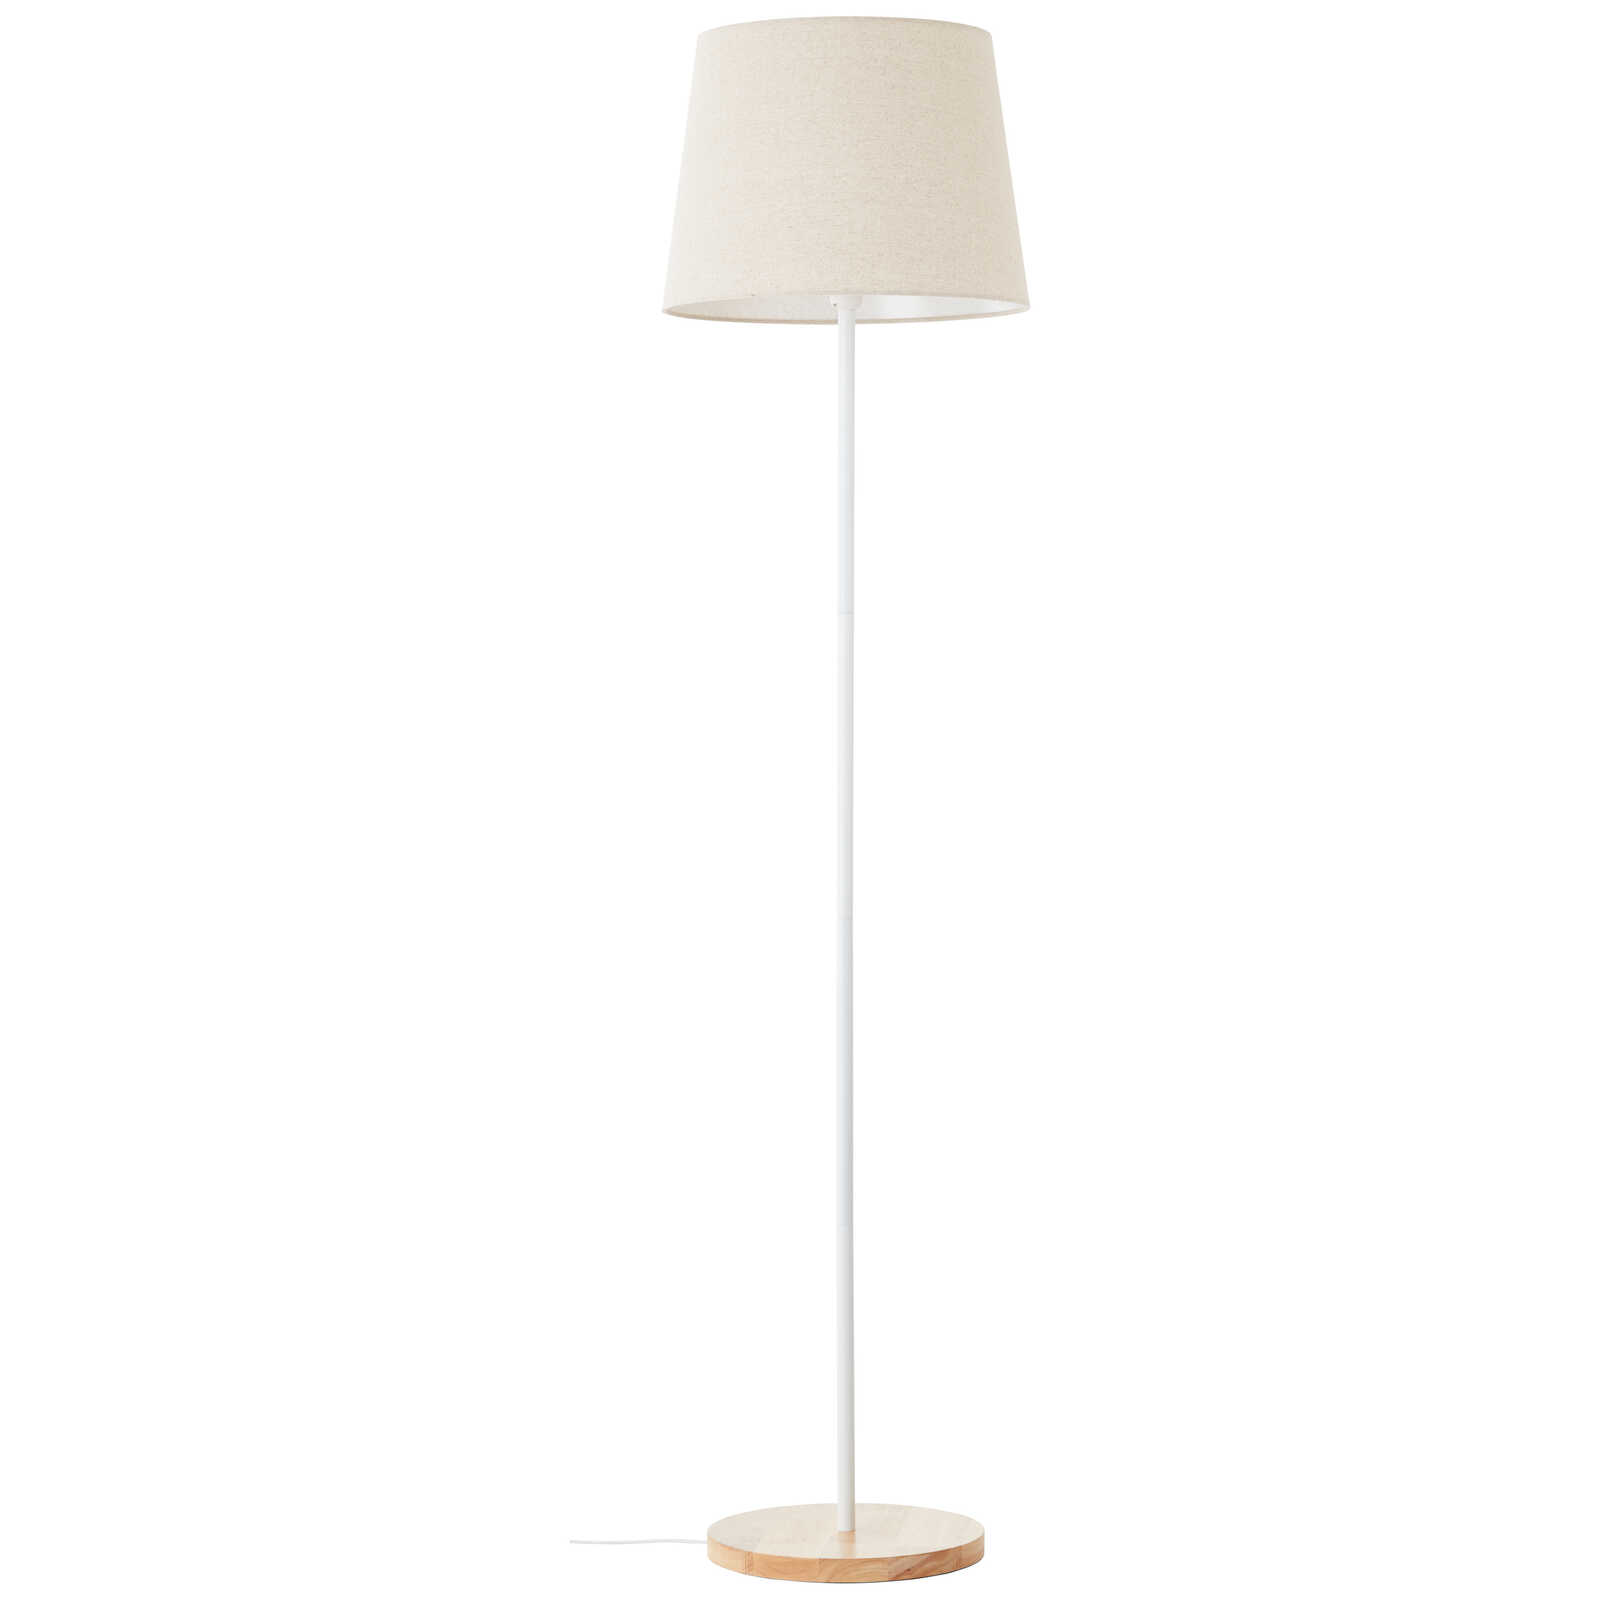             Floor lamp made of textile - Lenni 2 - Brown
        